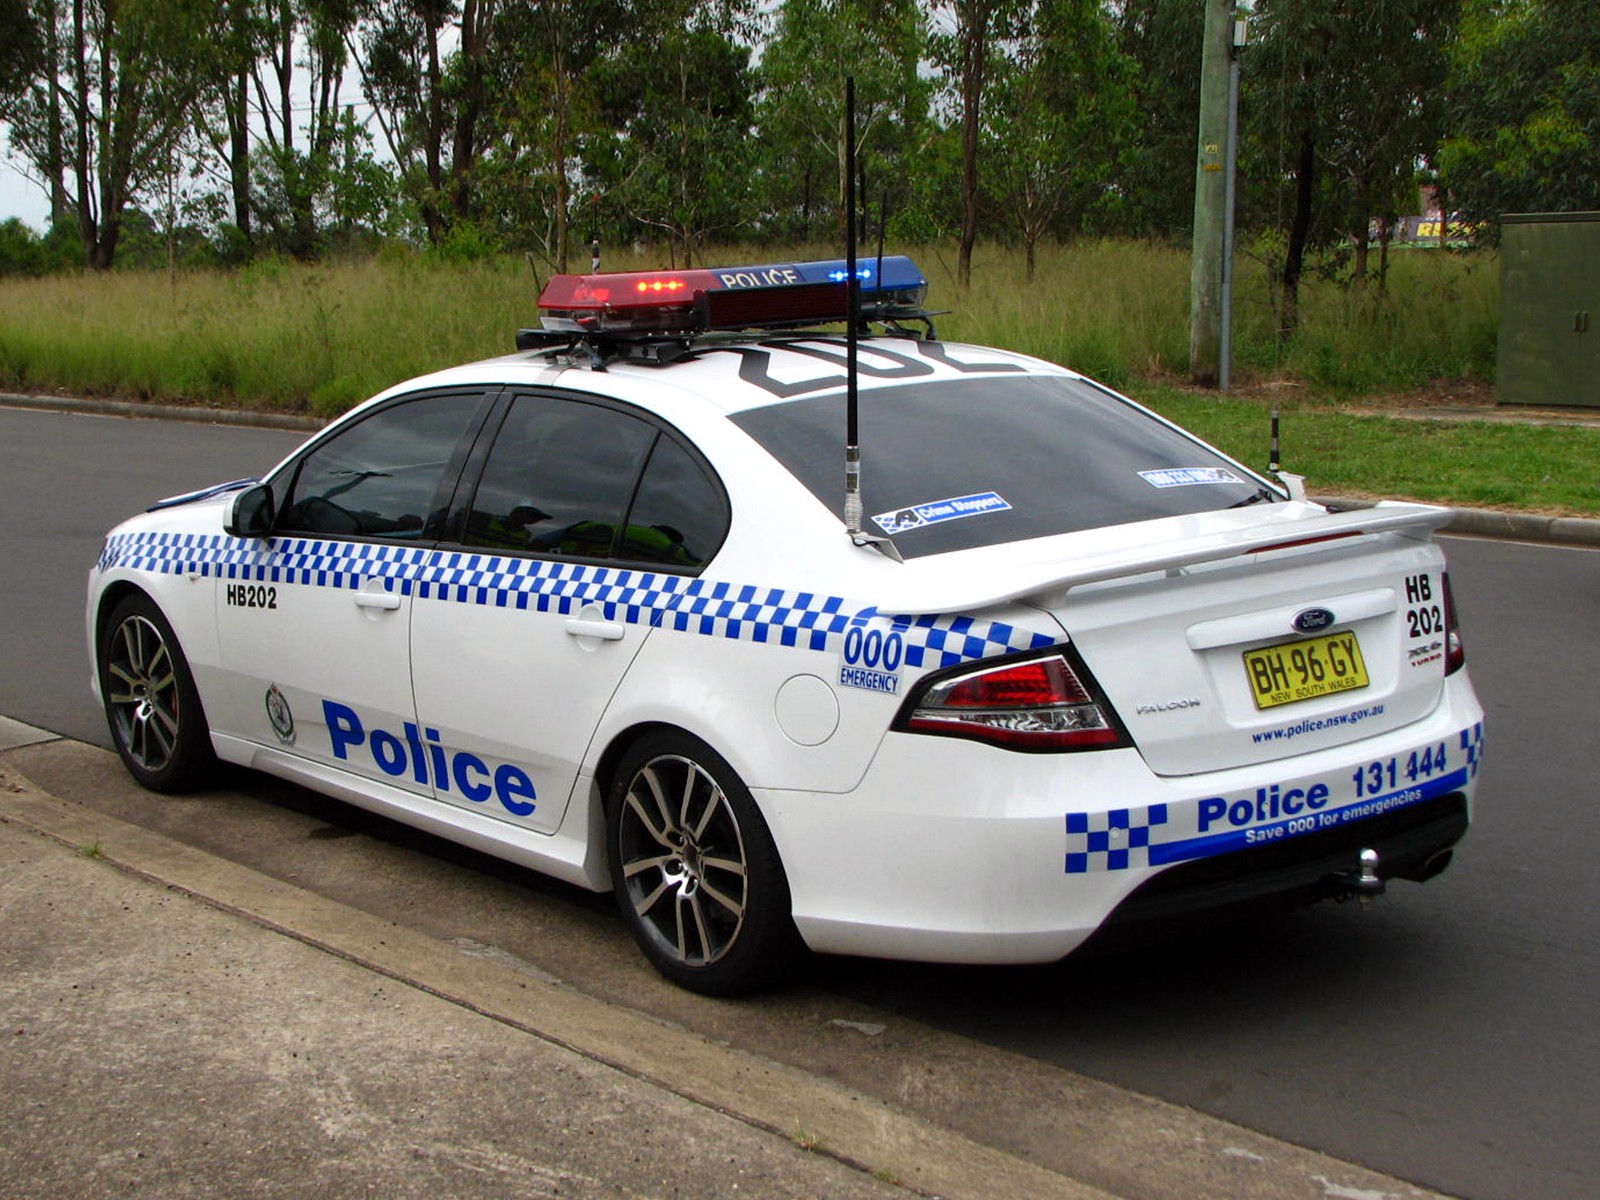 a police car with lights on in front of the road